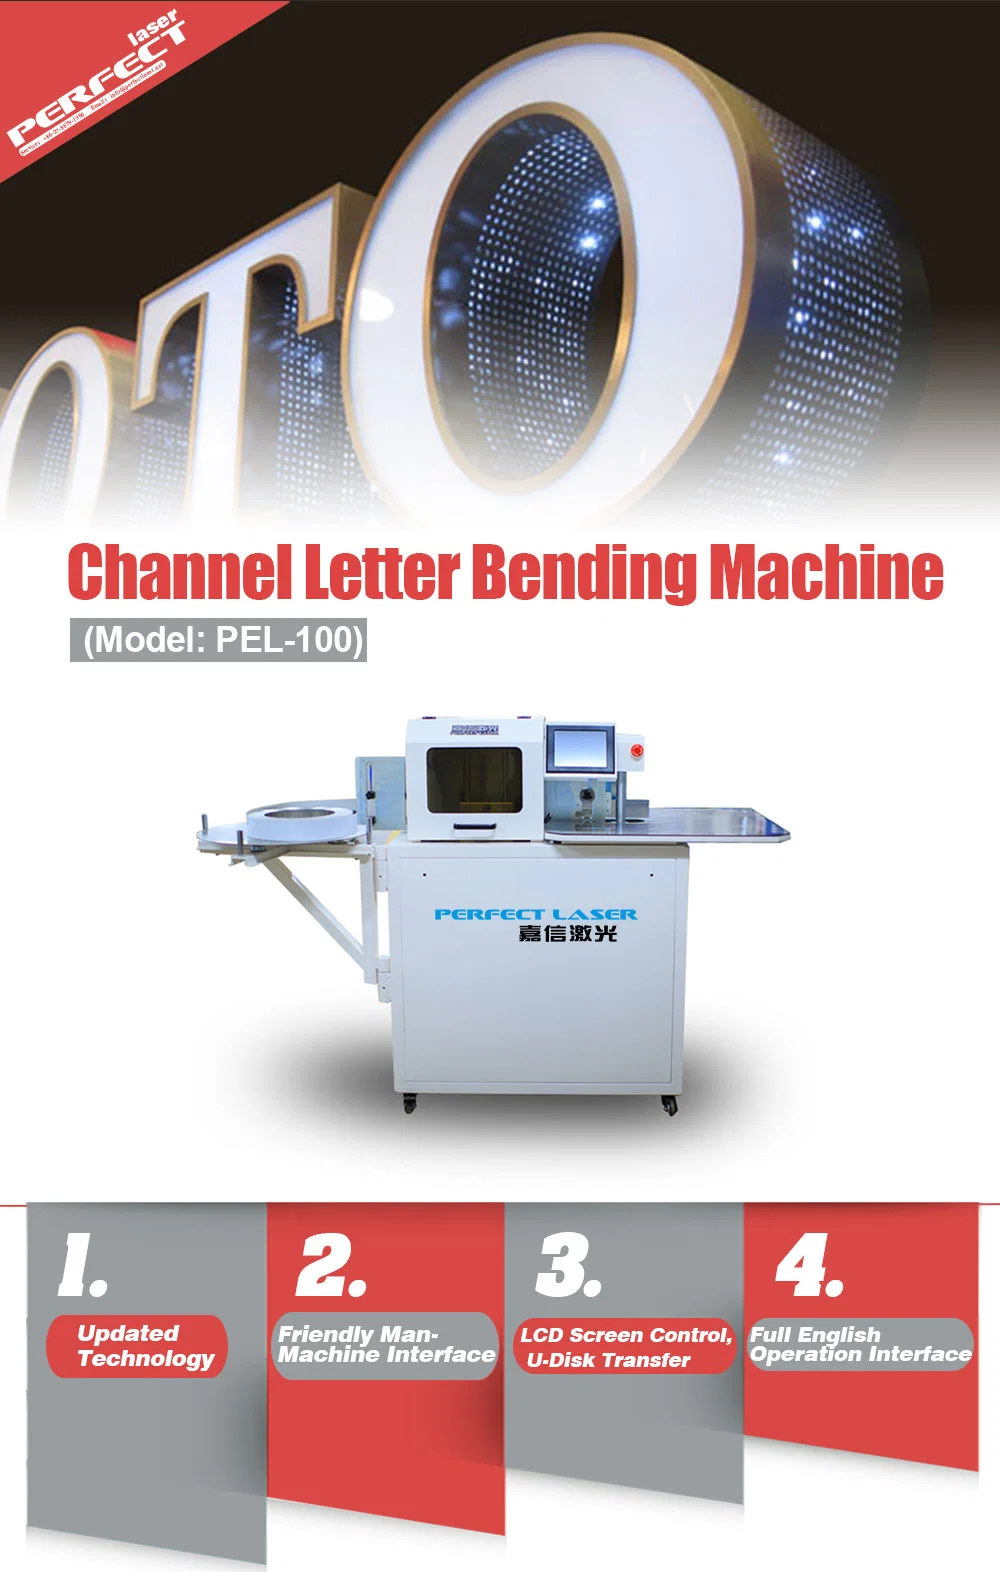 Channel Letter Stainless Steel Bending Machine